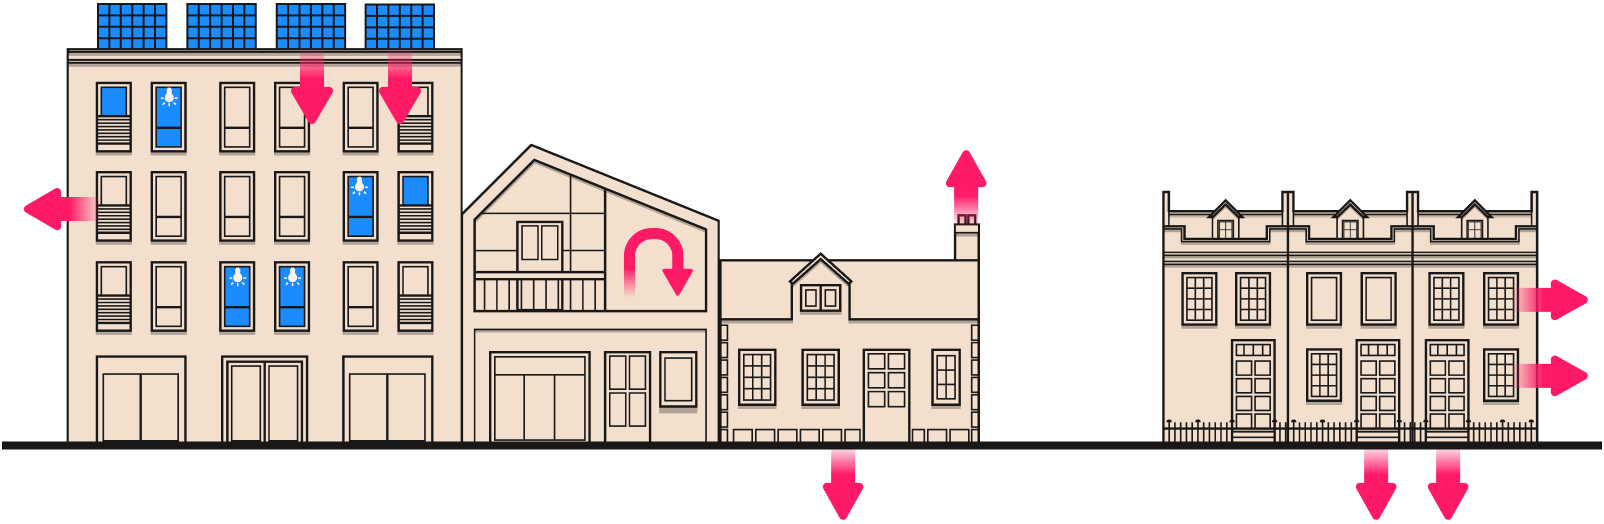 Illustration of buildings that have heat loss or energy efficiency upgrades